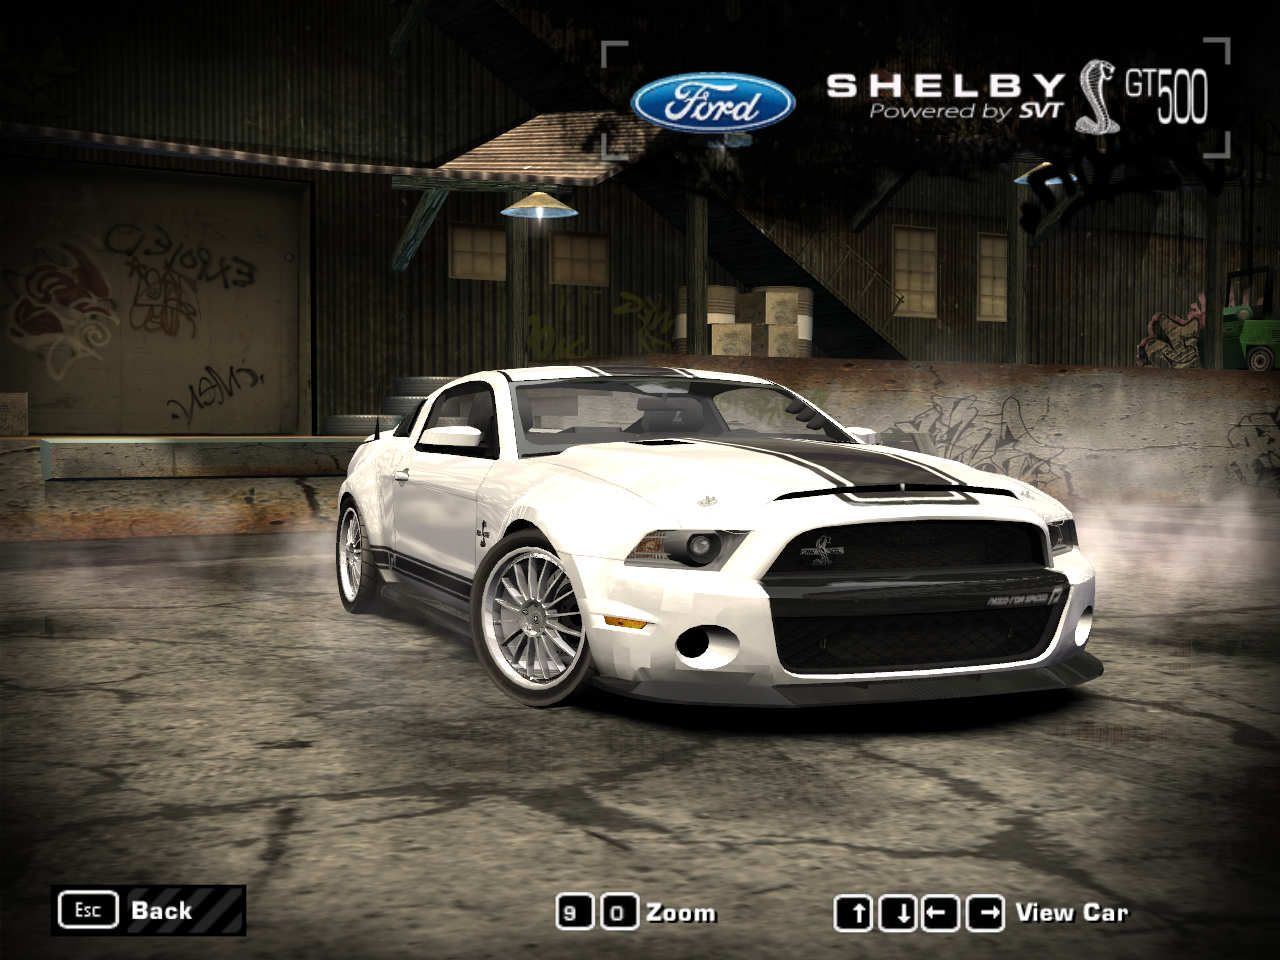 Ford Shelby GT500 Super Snake - "The Run" Edition (2012)